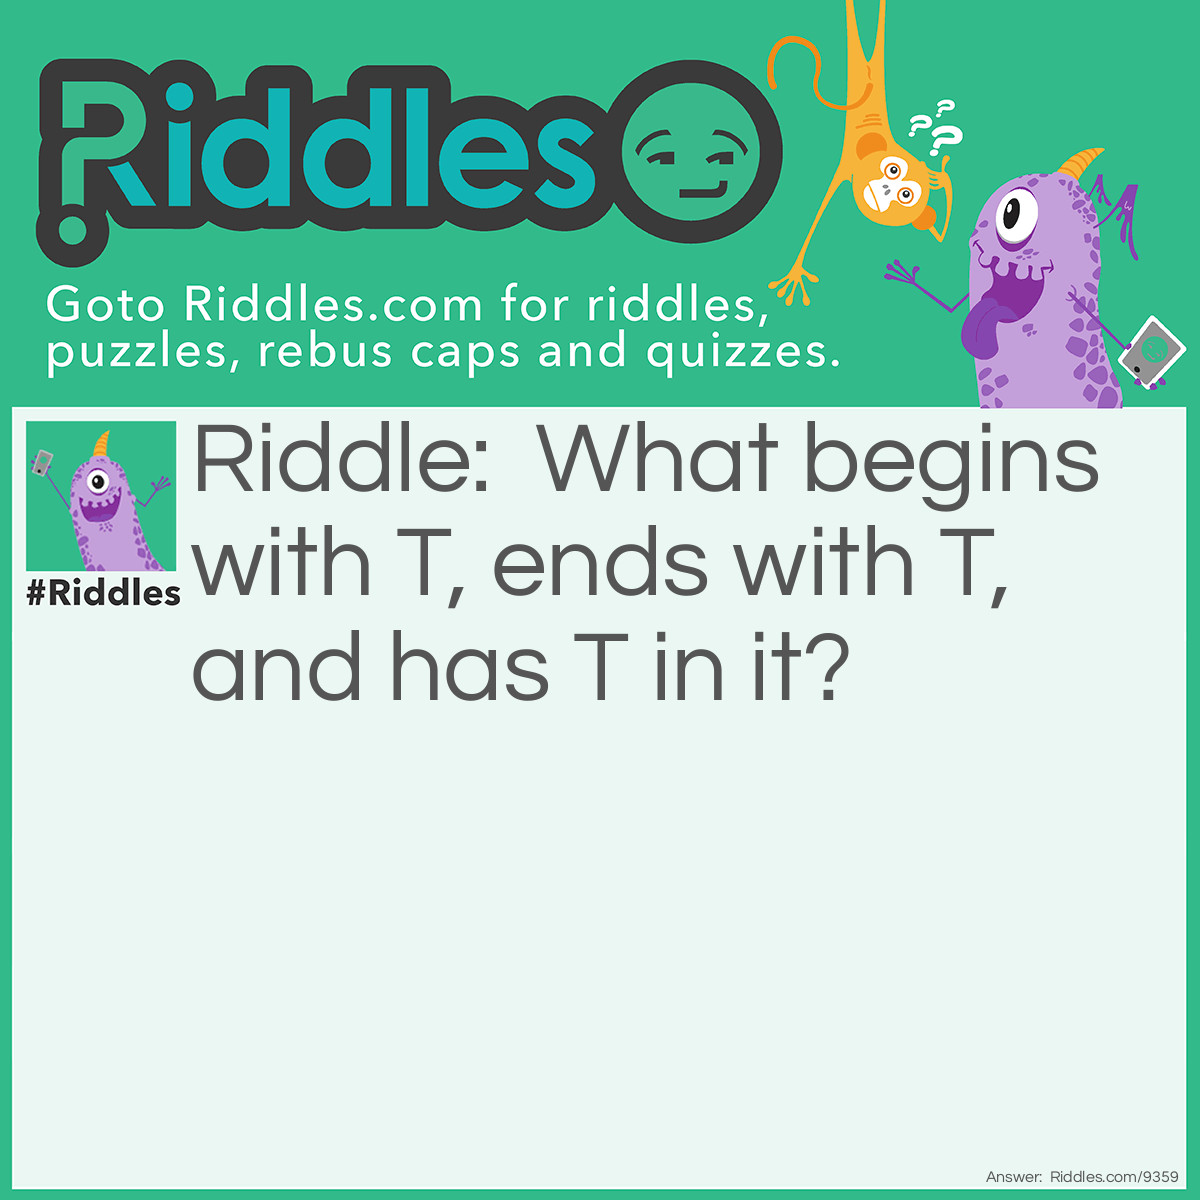 Riddle: What begins with T, ends with T, and has T in it? Answer: Teapot!